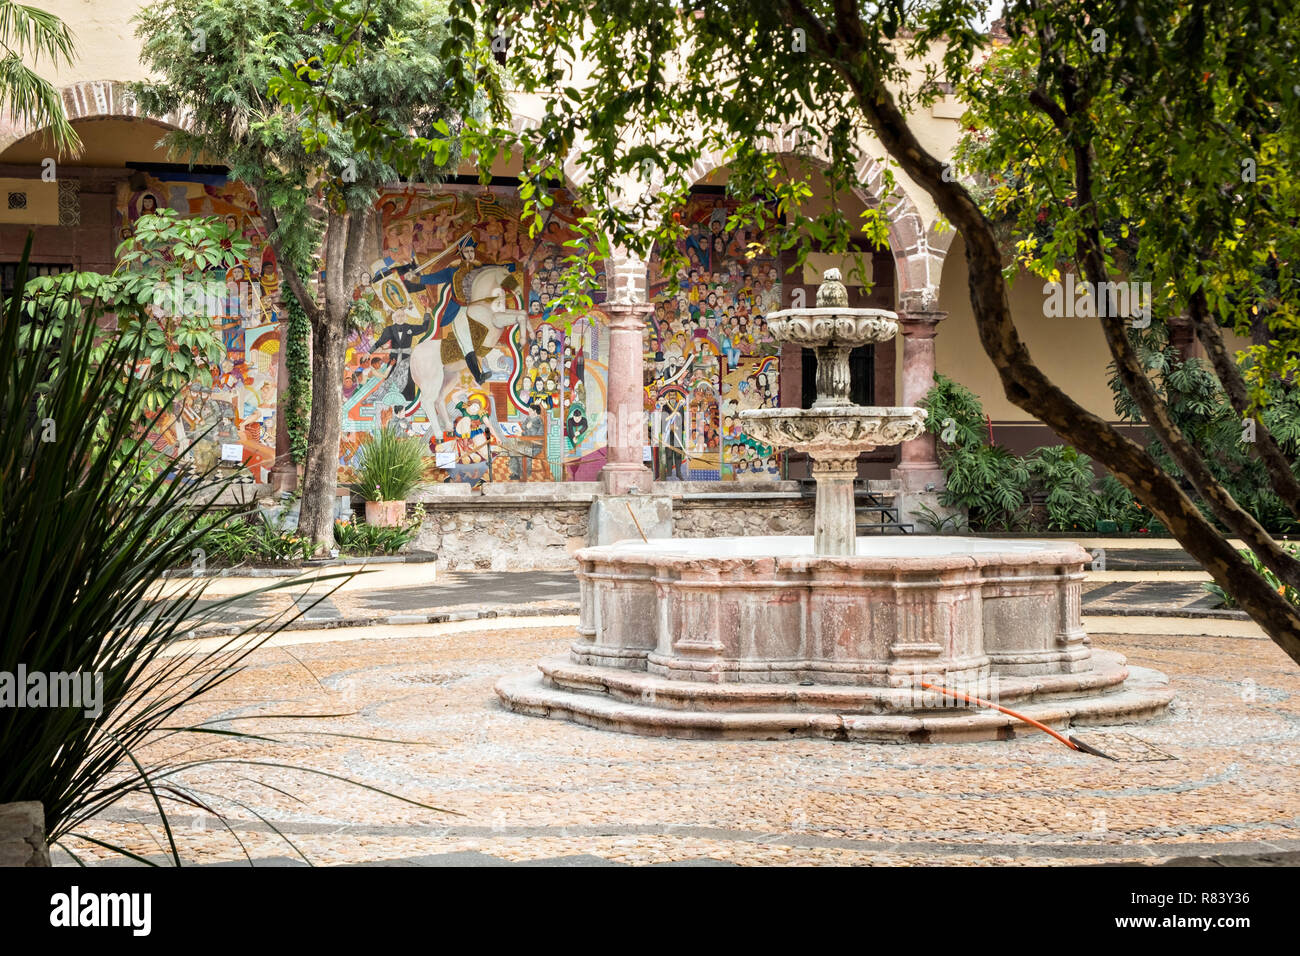 Interior courtyard with fountain at the Instituto Allende in San Miguel de Allende, Mexico. The mural in the background is by legendary Mexican muralist David Alfaro Siqueiros. Stock Photo